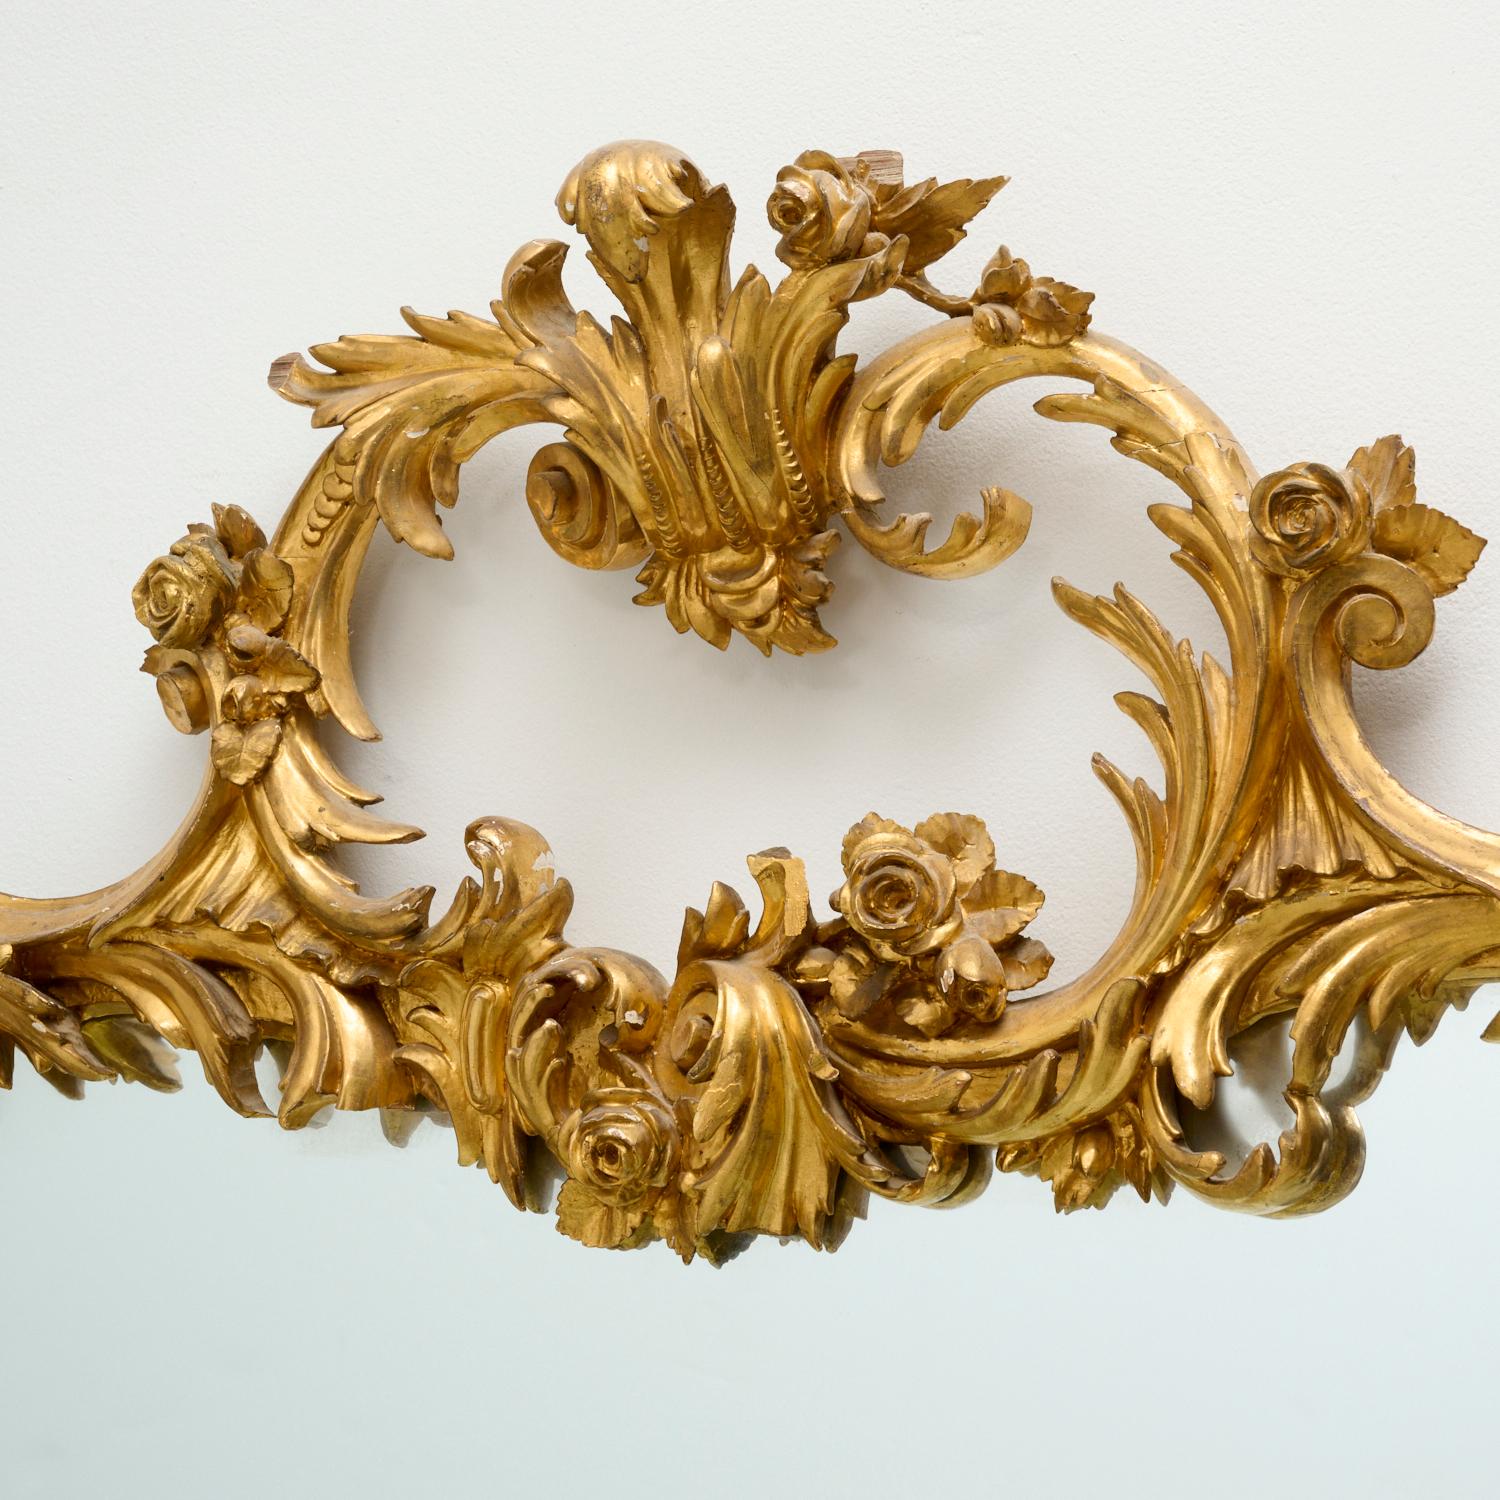 19th century, a stunning large George III giltwood pier mirror elaborately carved with an openwork top crest of floral scrolls and acanthus frond, above shaped rectangular frame carved with similar decoration, containing a single pane of mirrored